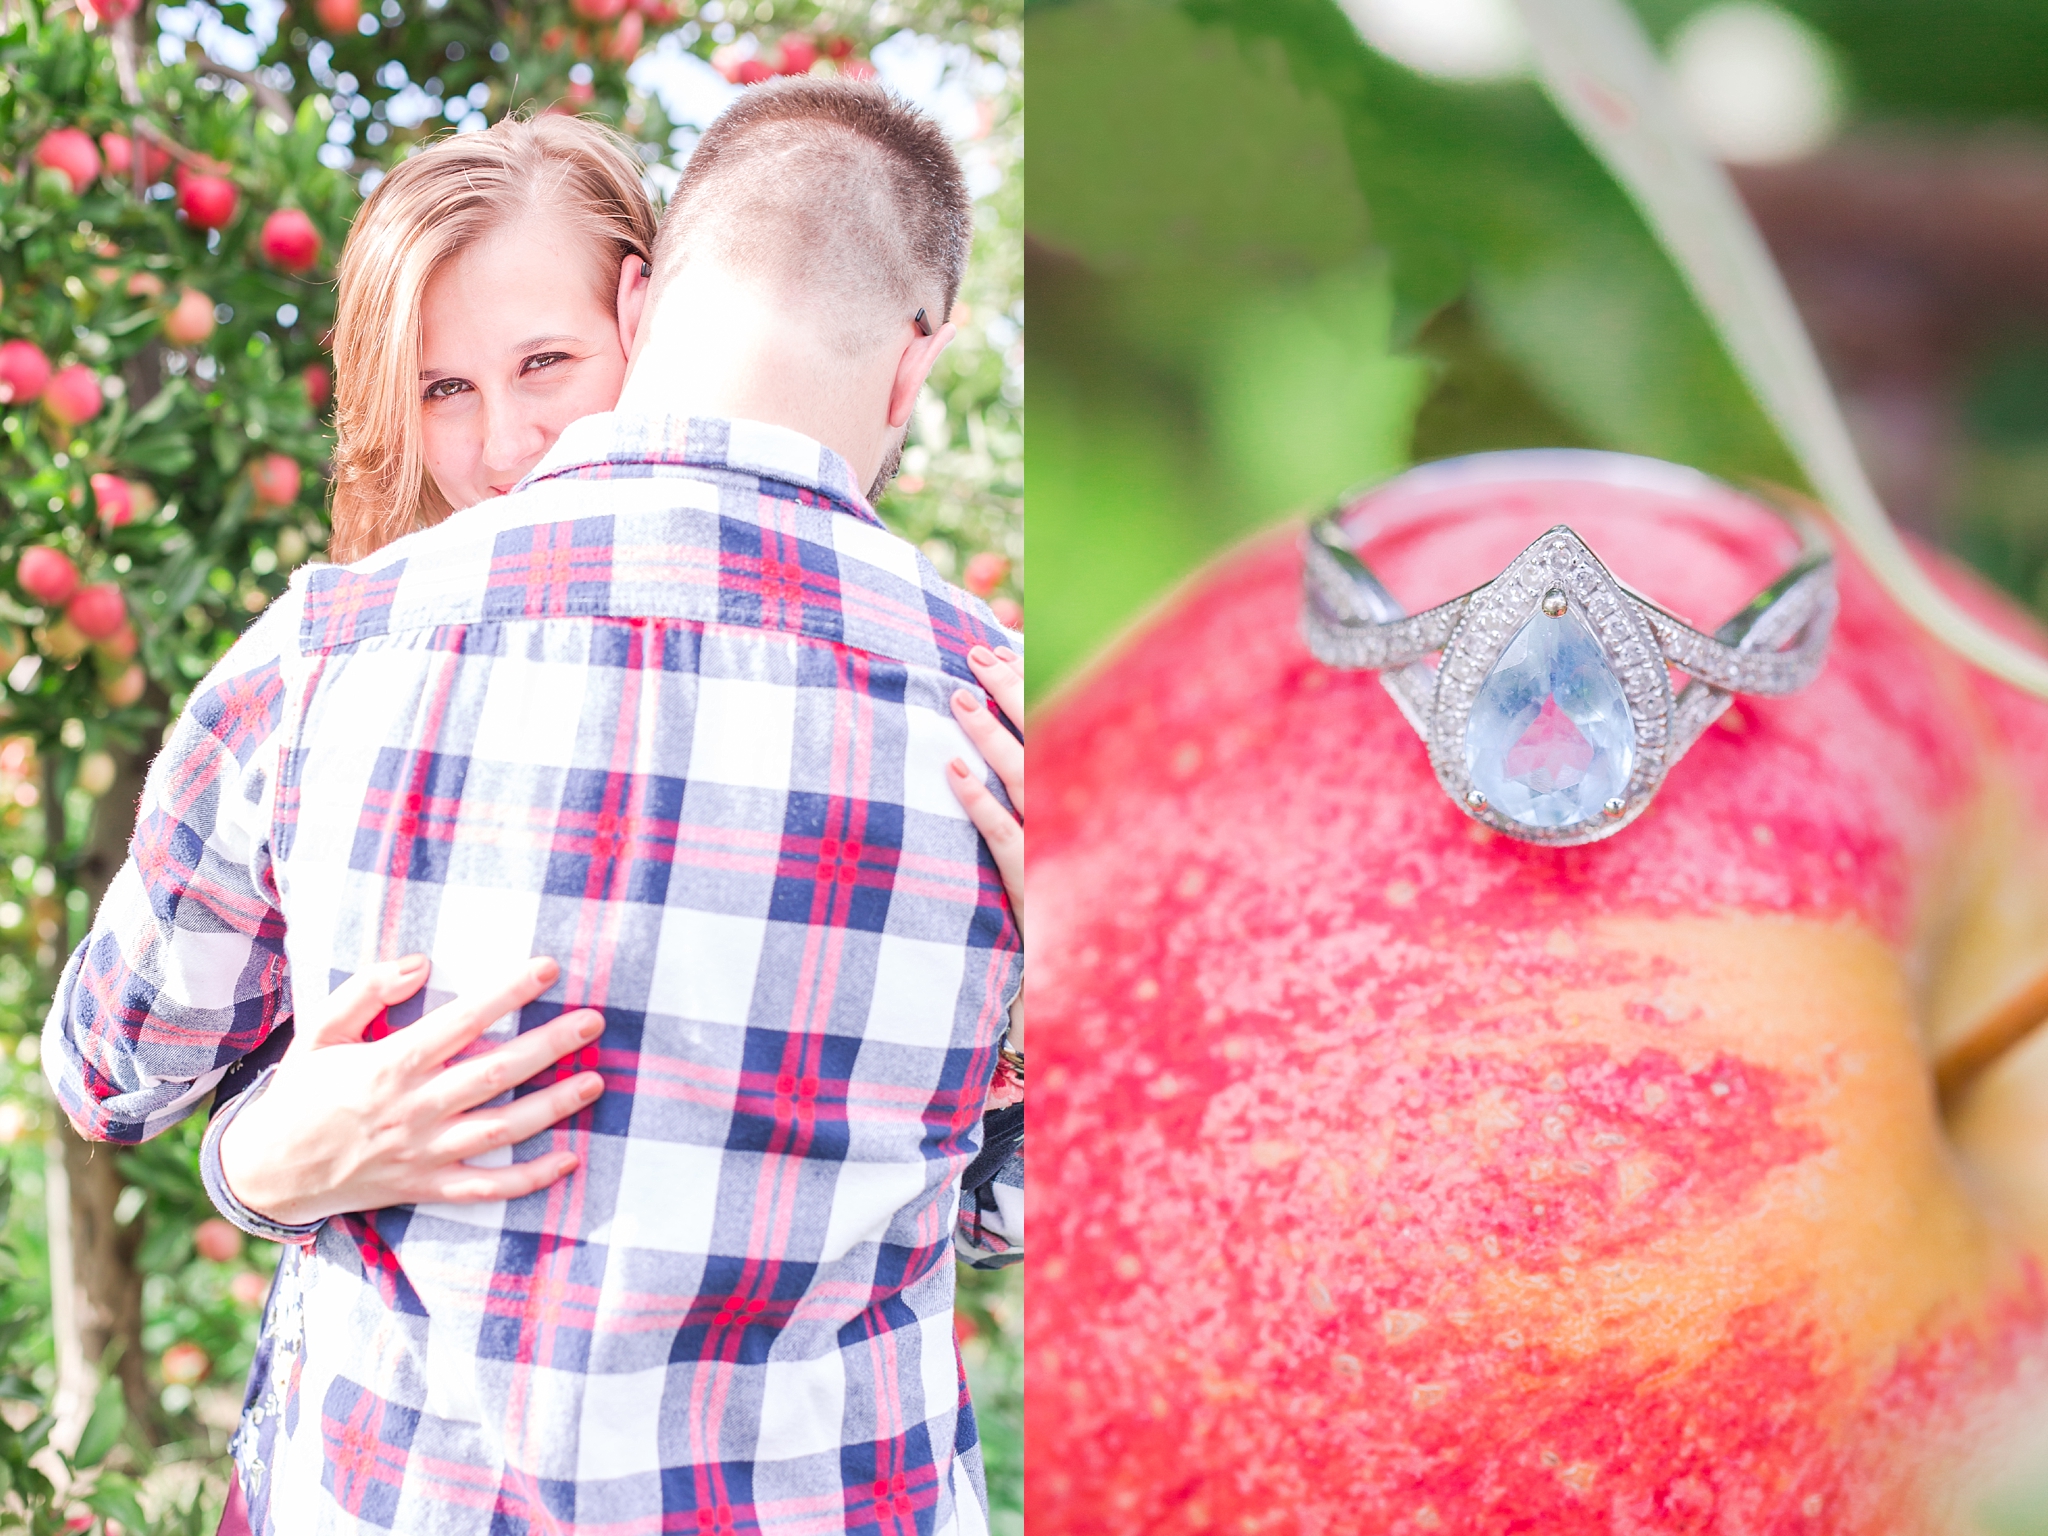 playful-fall-engagement-photos-at-hy's-cider-mill-ochard-in-bruce-township-michigan-by-courtney-carolyn-photography_0021.jpg